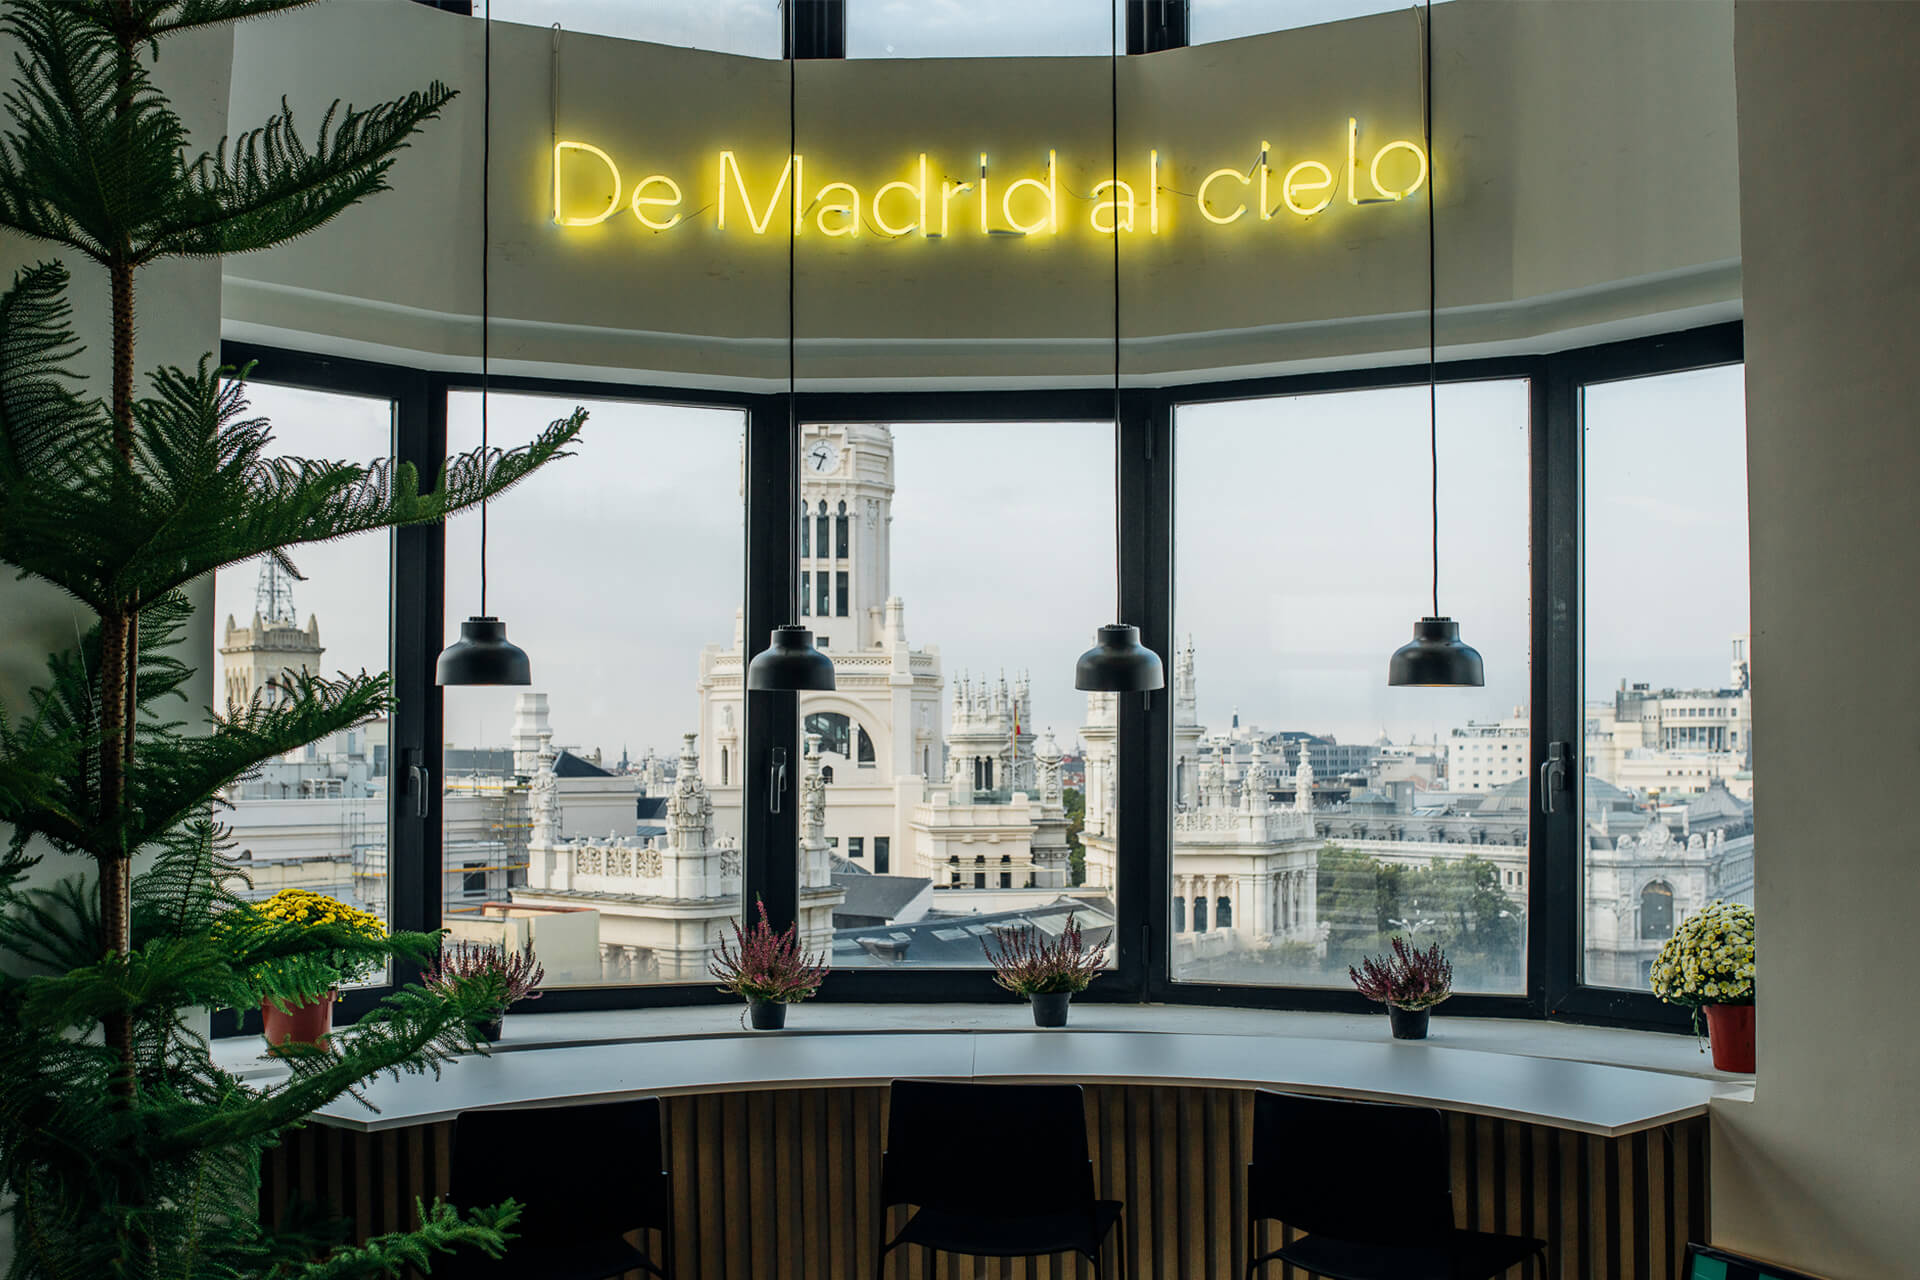 Our #mustvisit in Madrid